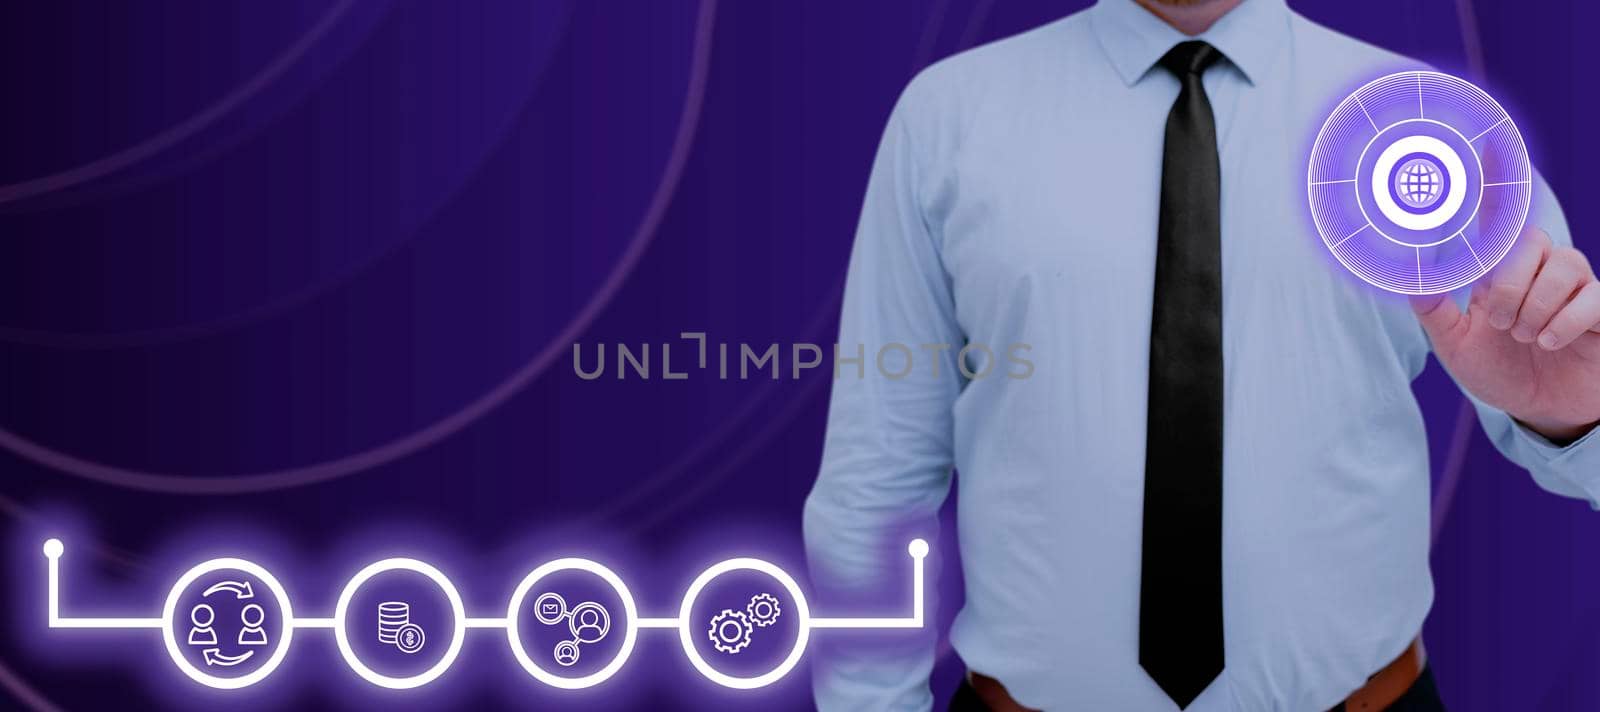 Businessman Pointing On Glowing Symbols And Making A Presentation In A Meeting. Man With A Tie Pressing On S Showing Digital Connectivity And Receiving Crucial Data. by nialowwa